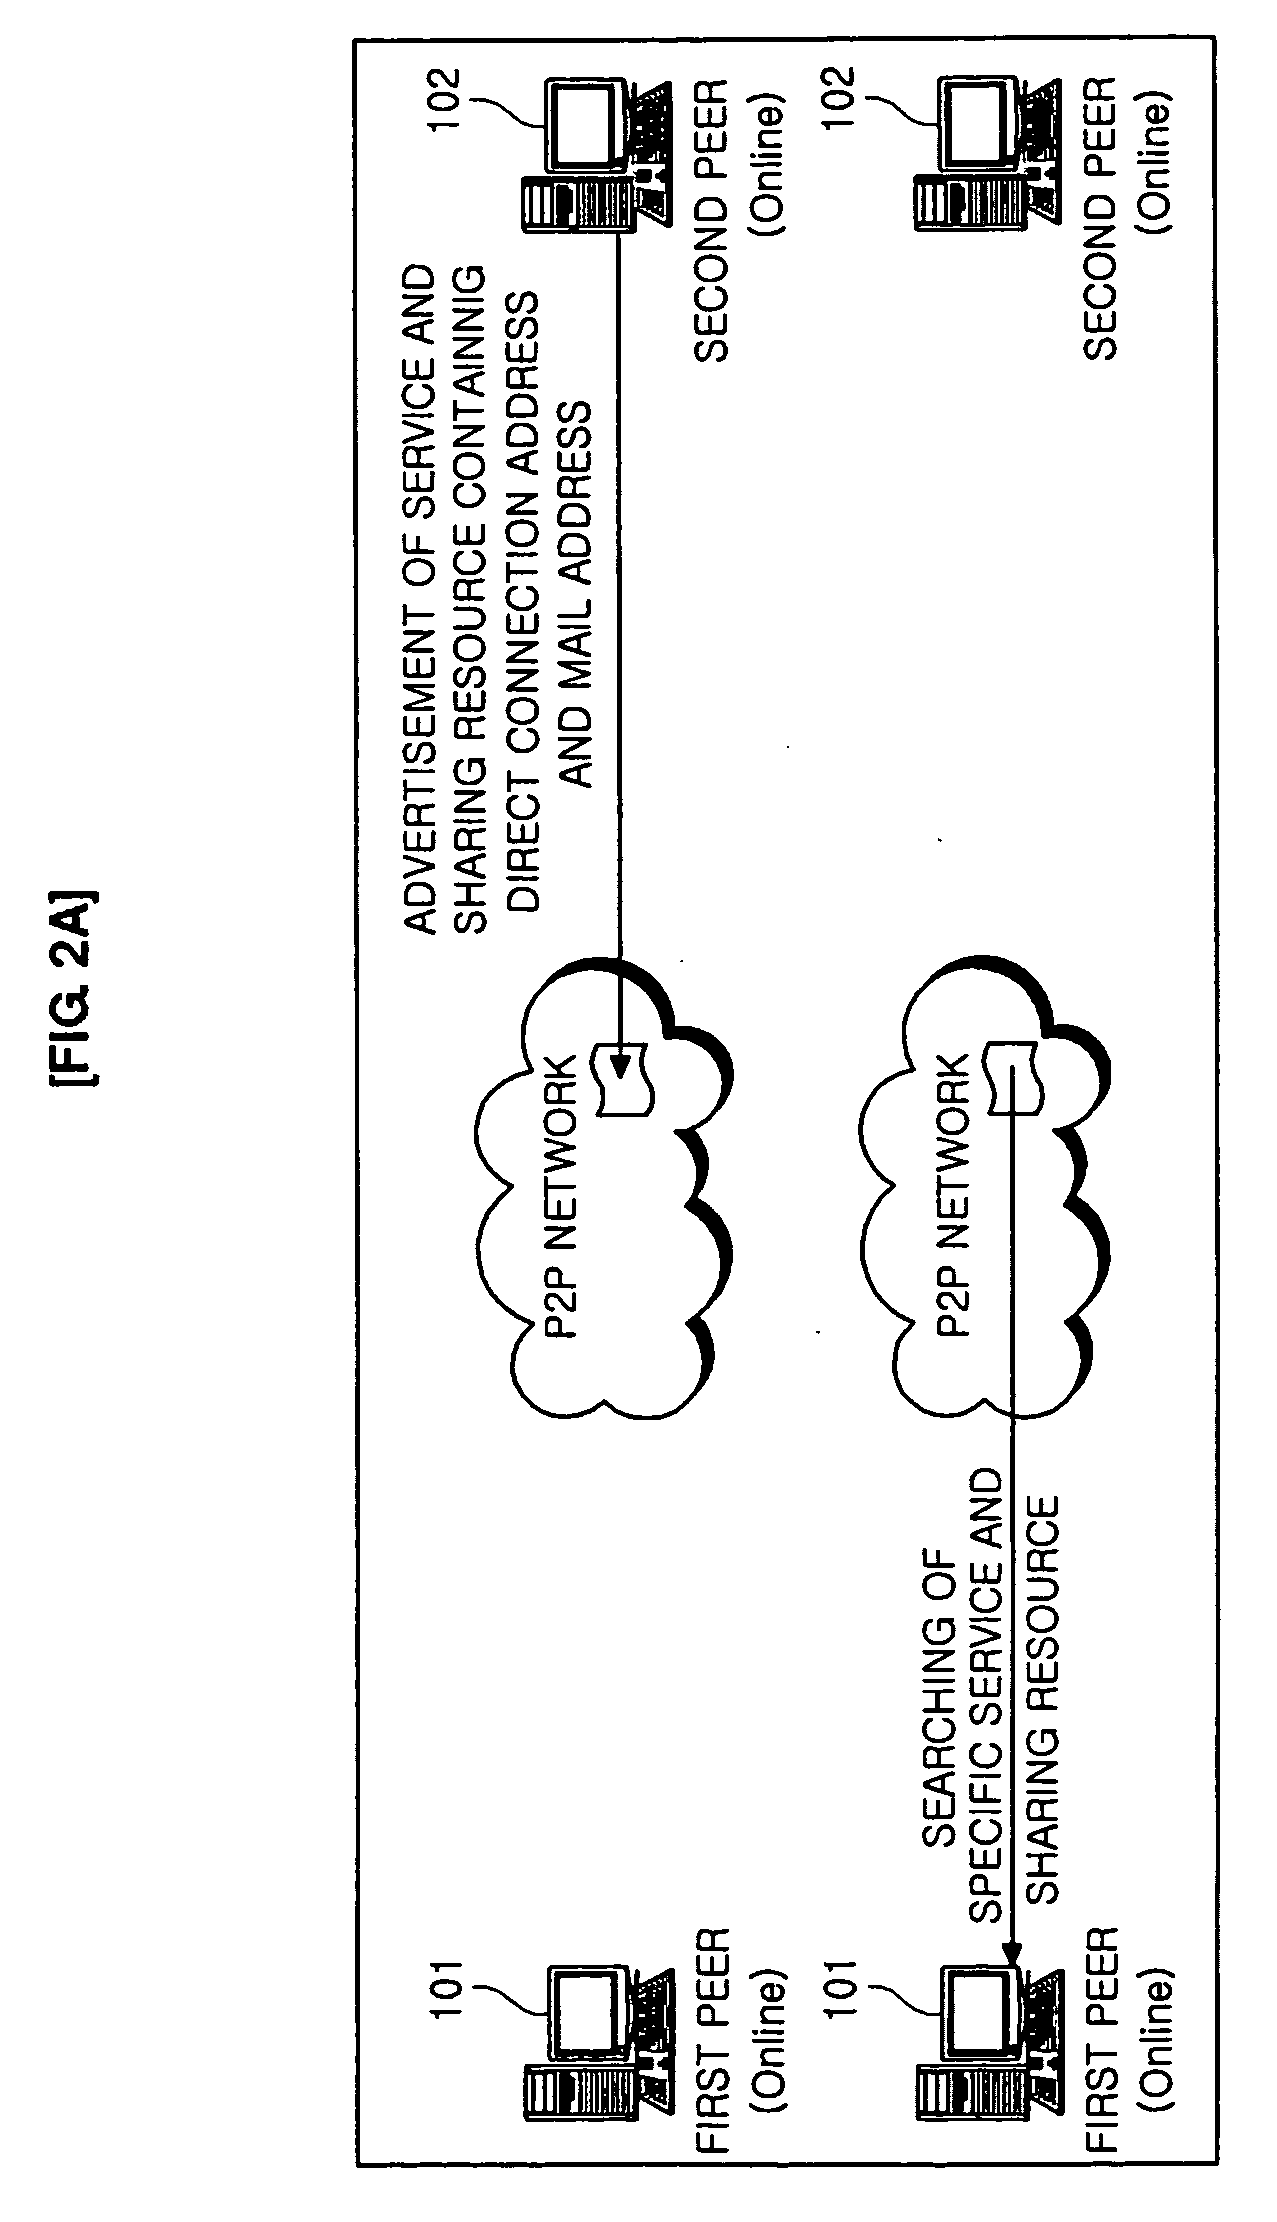 Peer-to-peer service system and method using e-mail service